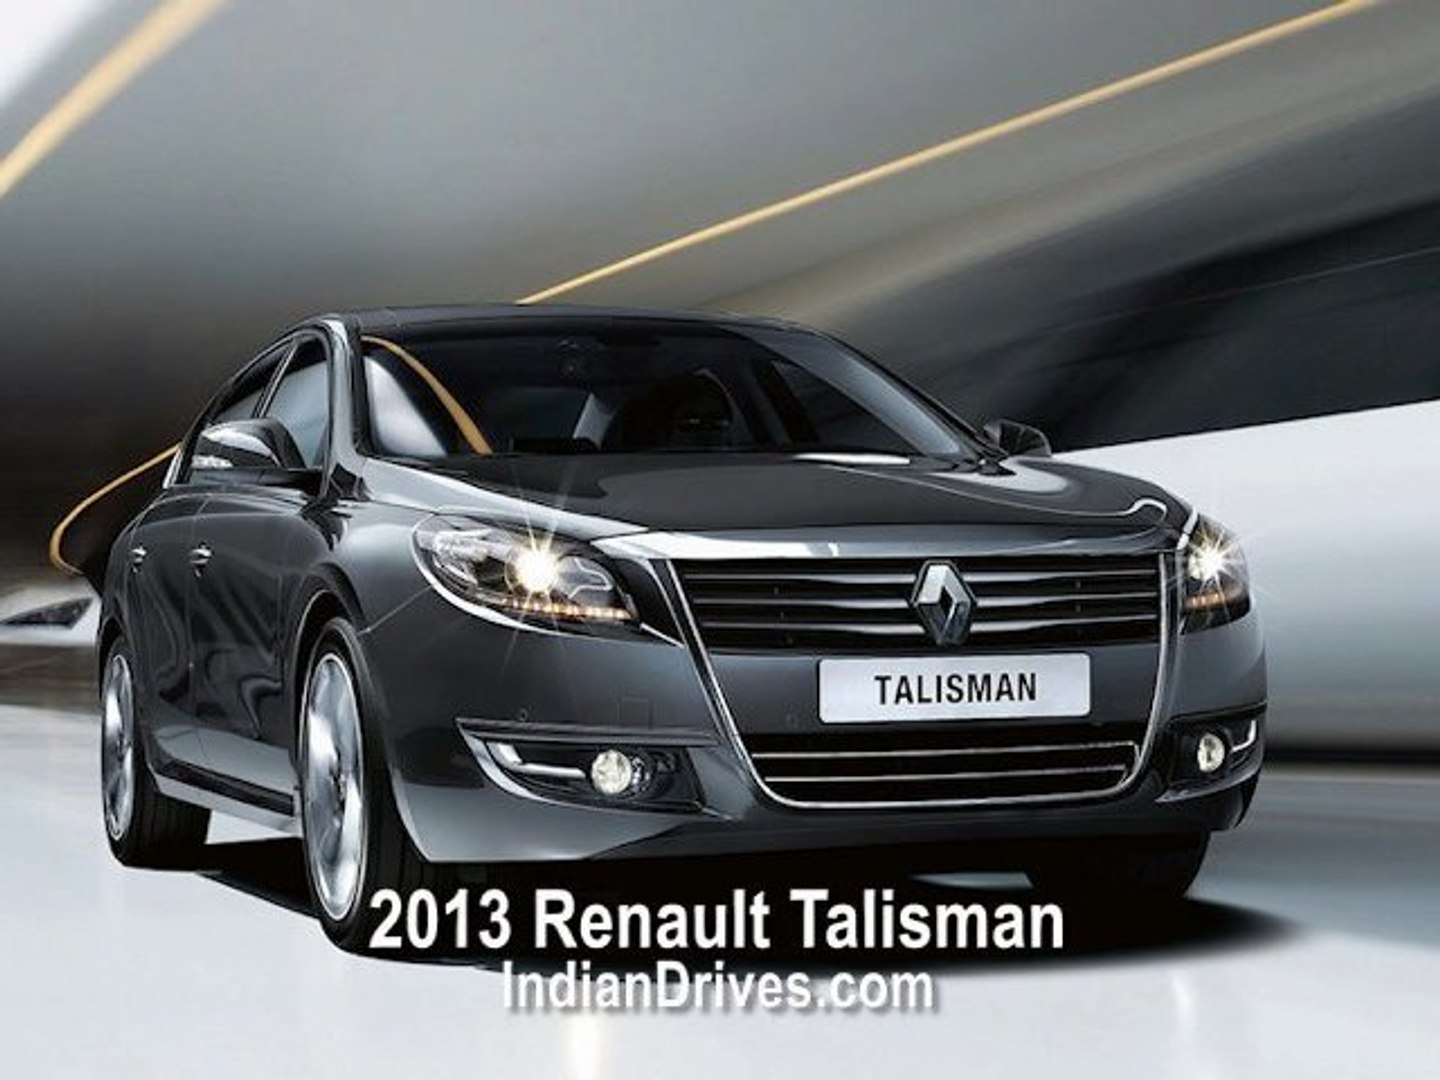 2013 Renault Talisman - A Casual Luxury - video Dailymotion